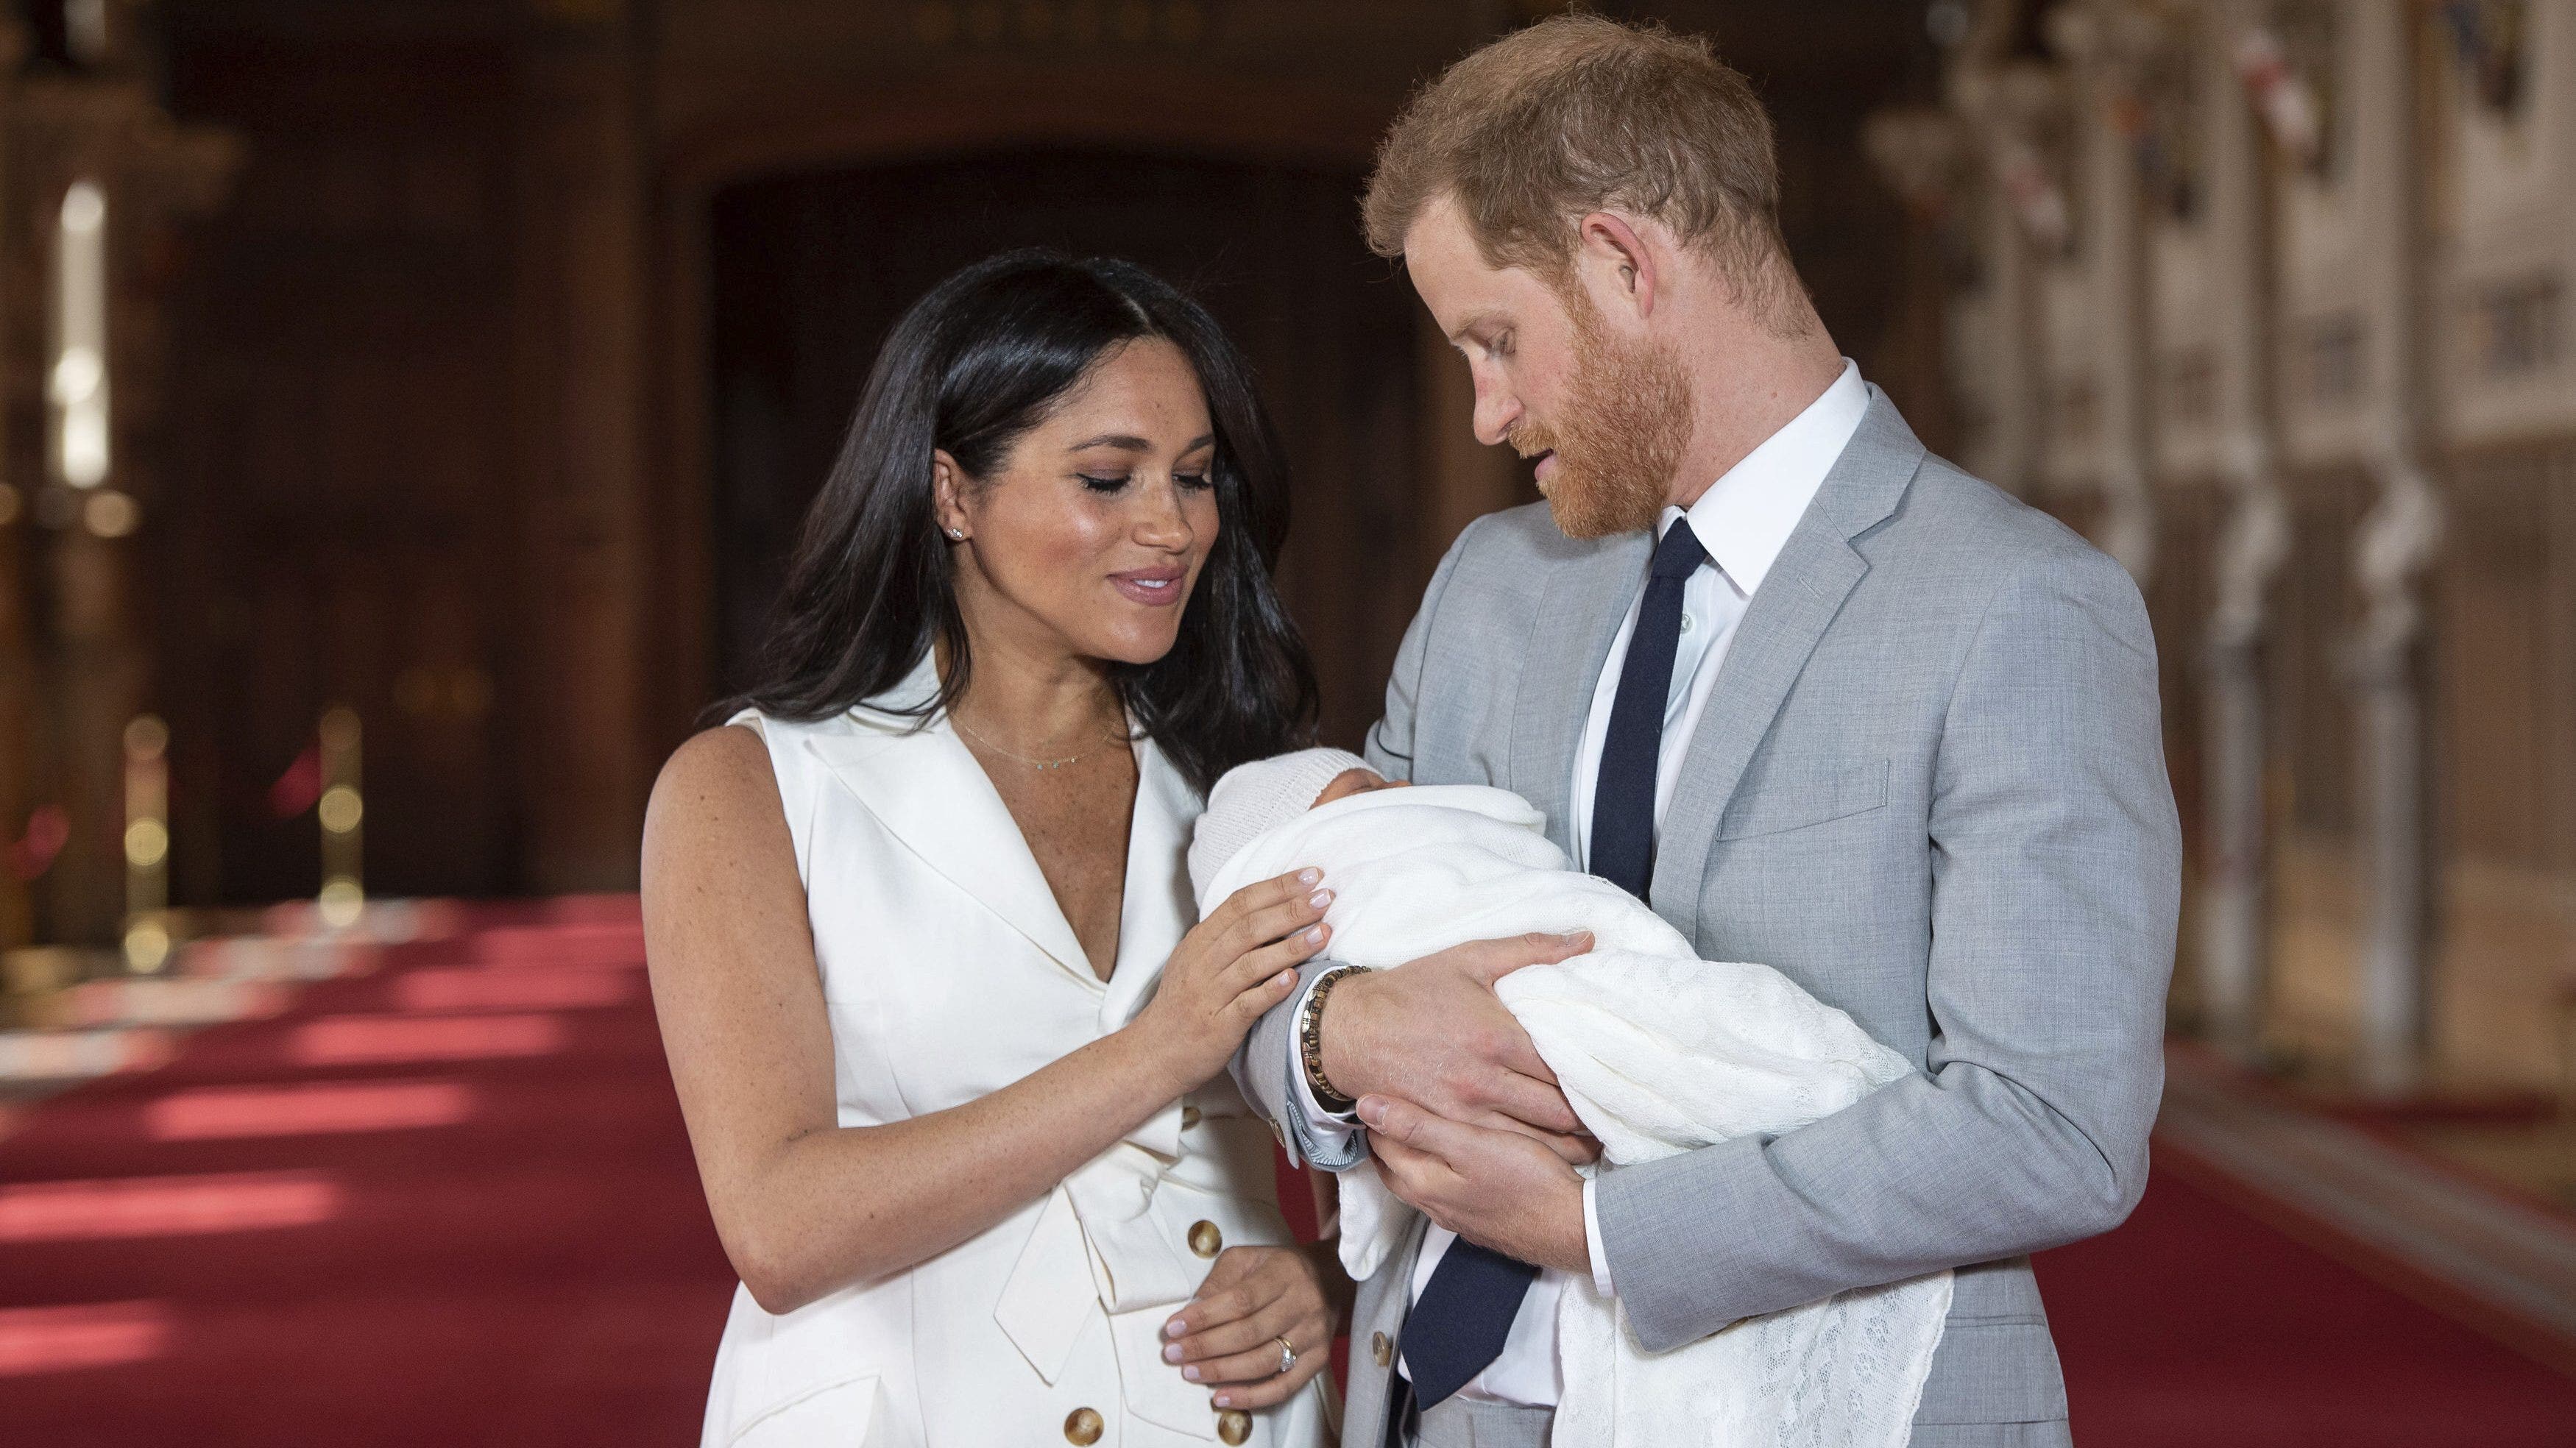 Meghan Markle, Prince Harry prep for 2nd baby: Experts say this is how you welcome new siblings